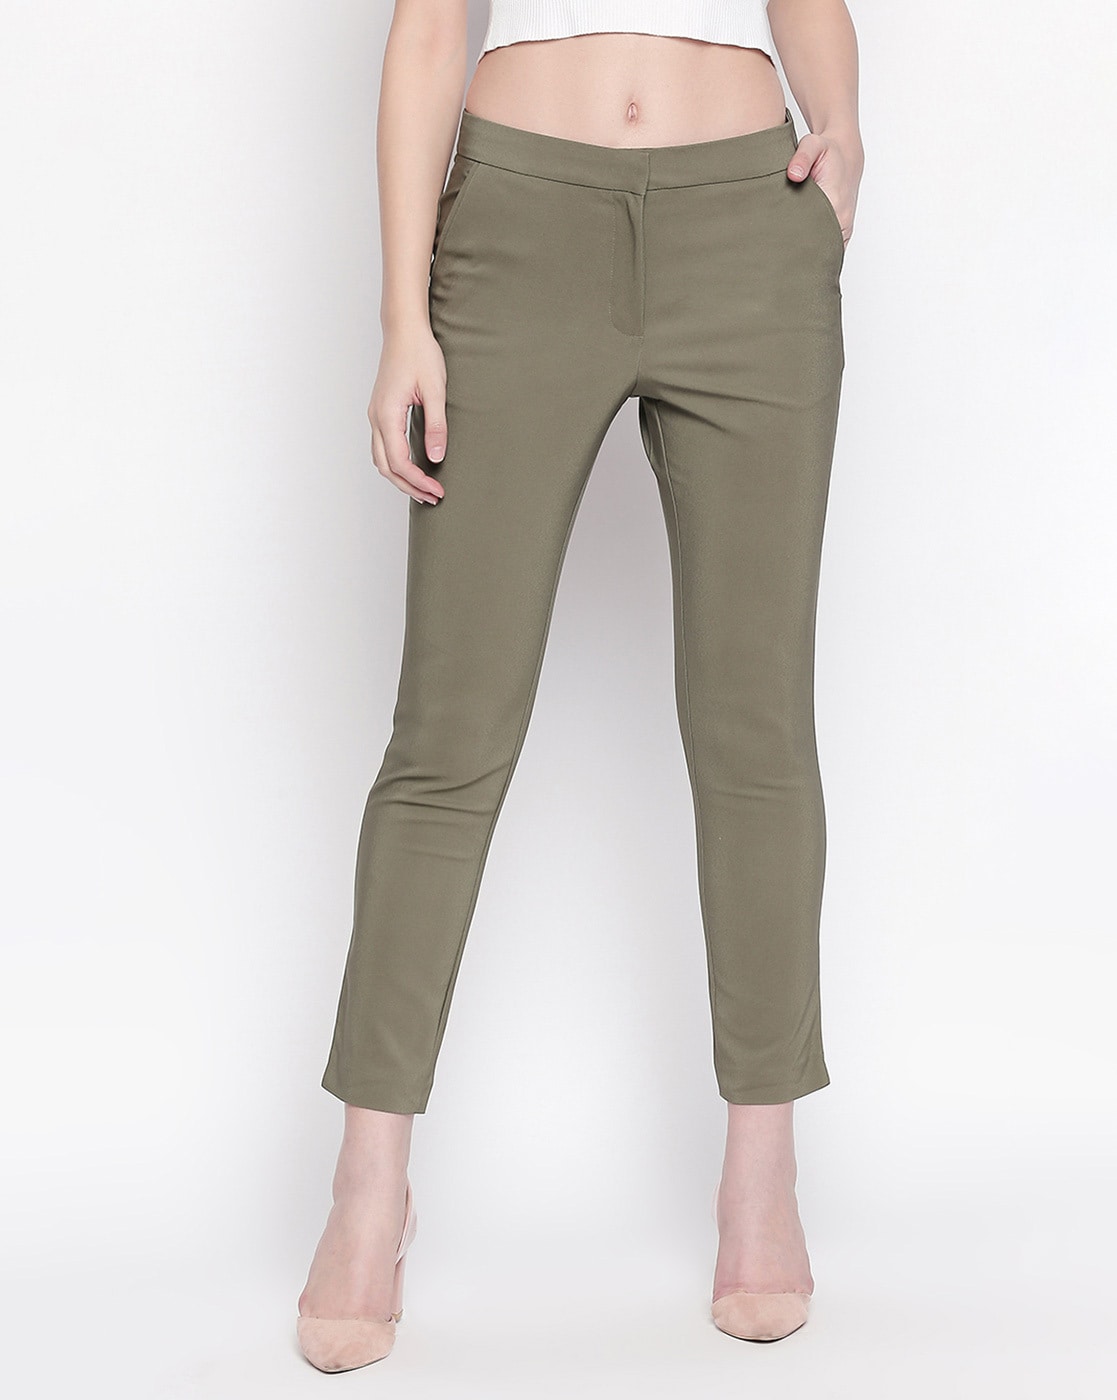 Annabelle Women Solid Navy Trousers - Selling Fast at Pantaloons.com